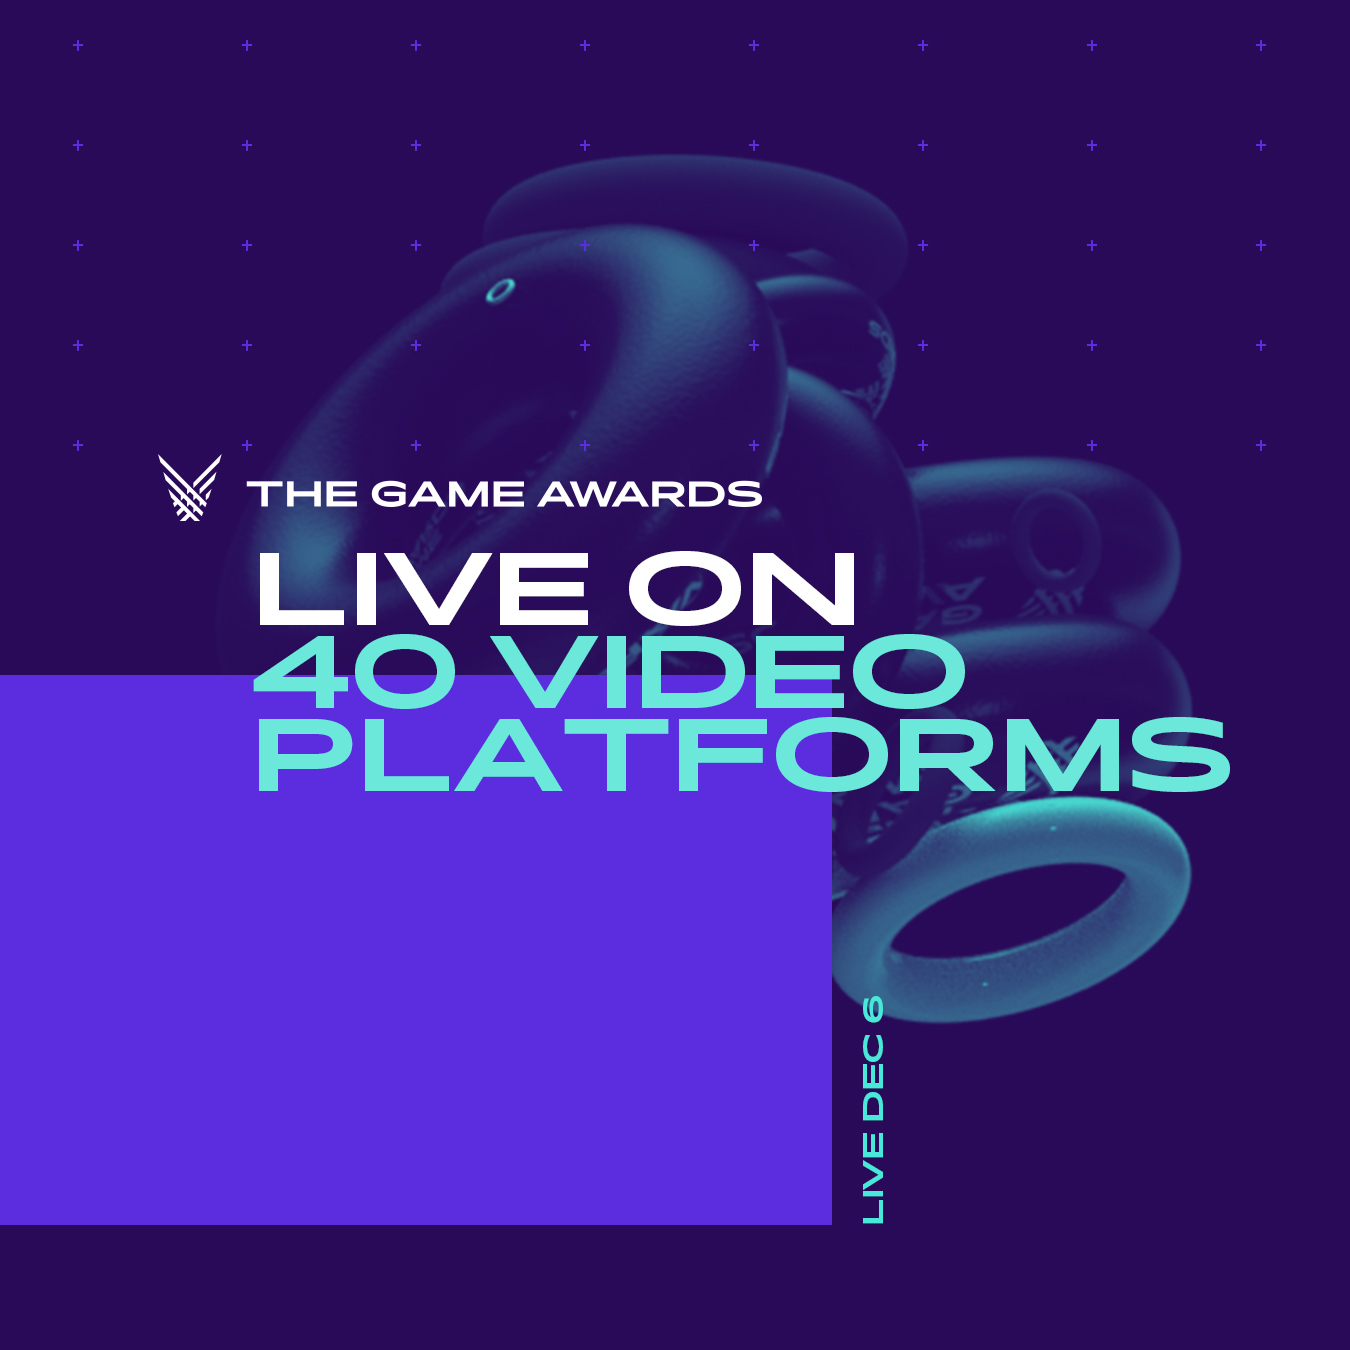 The Game Awards To Stream Live on 40 Video Platforms News The Game